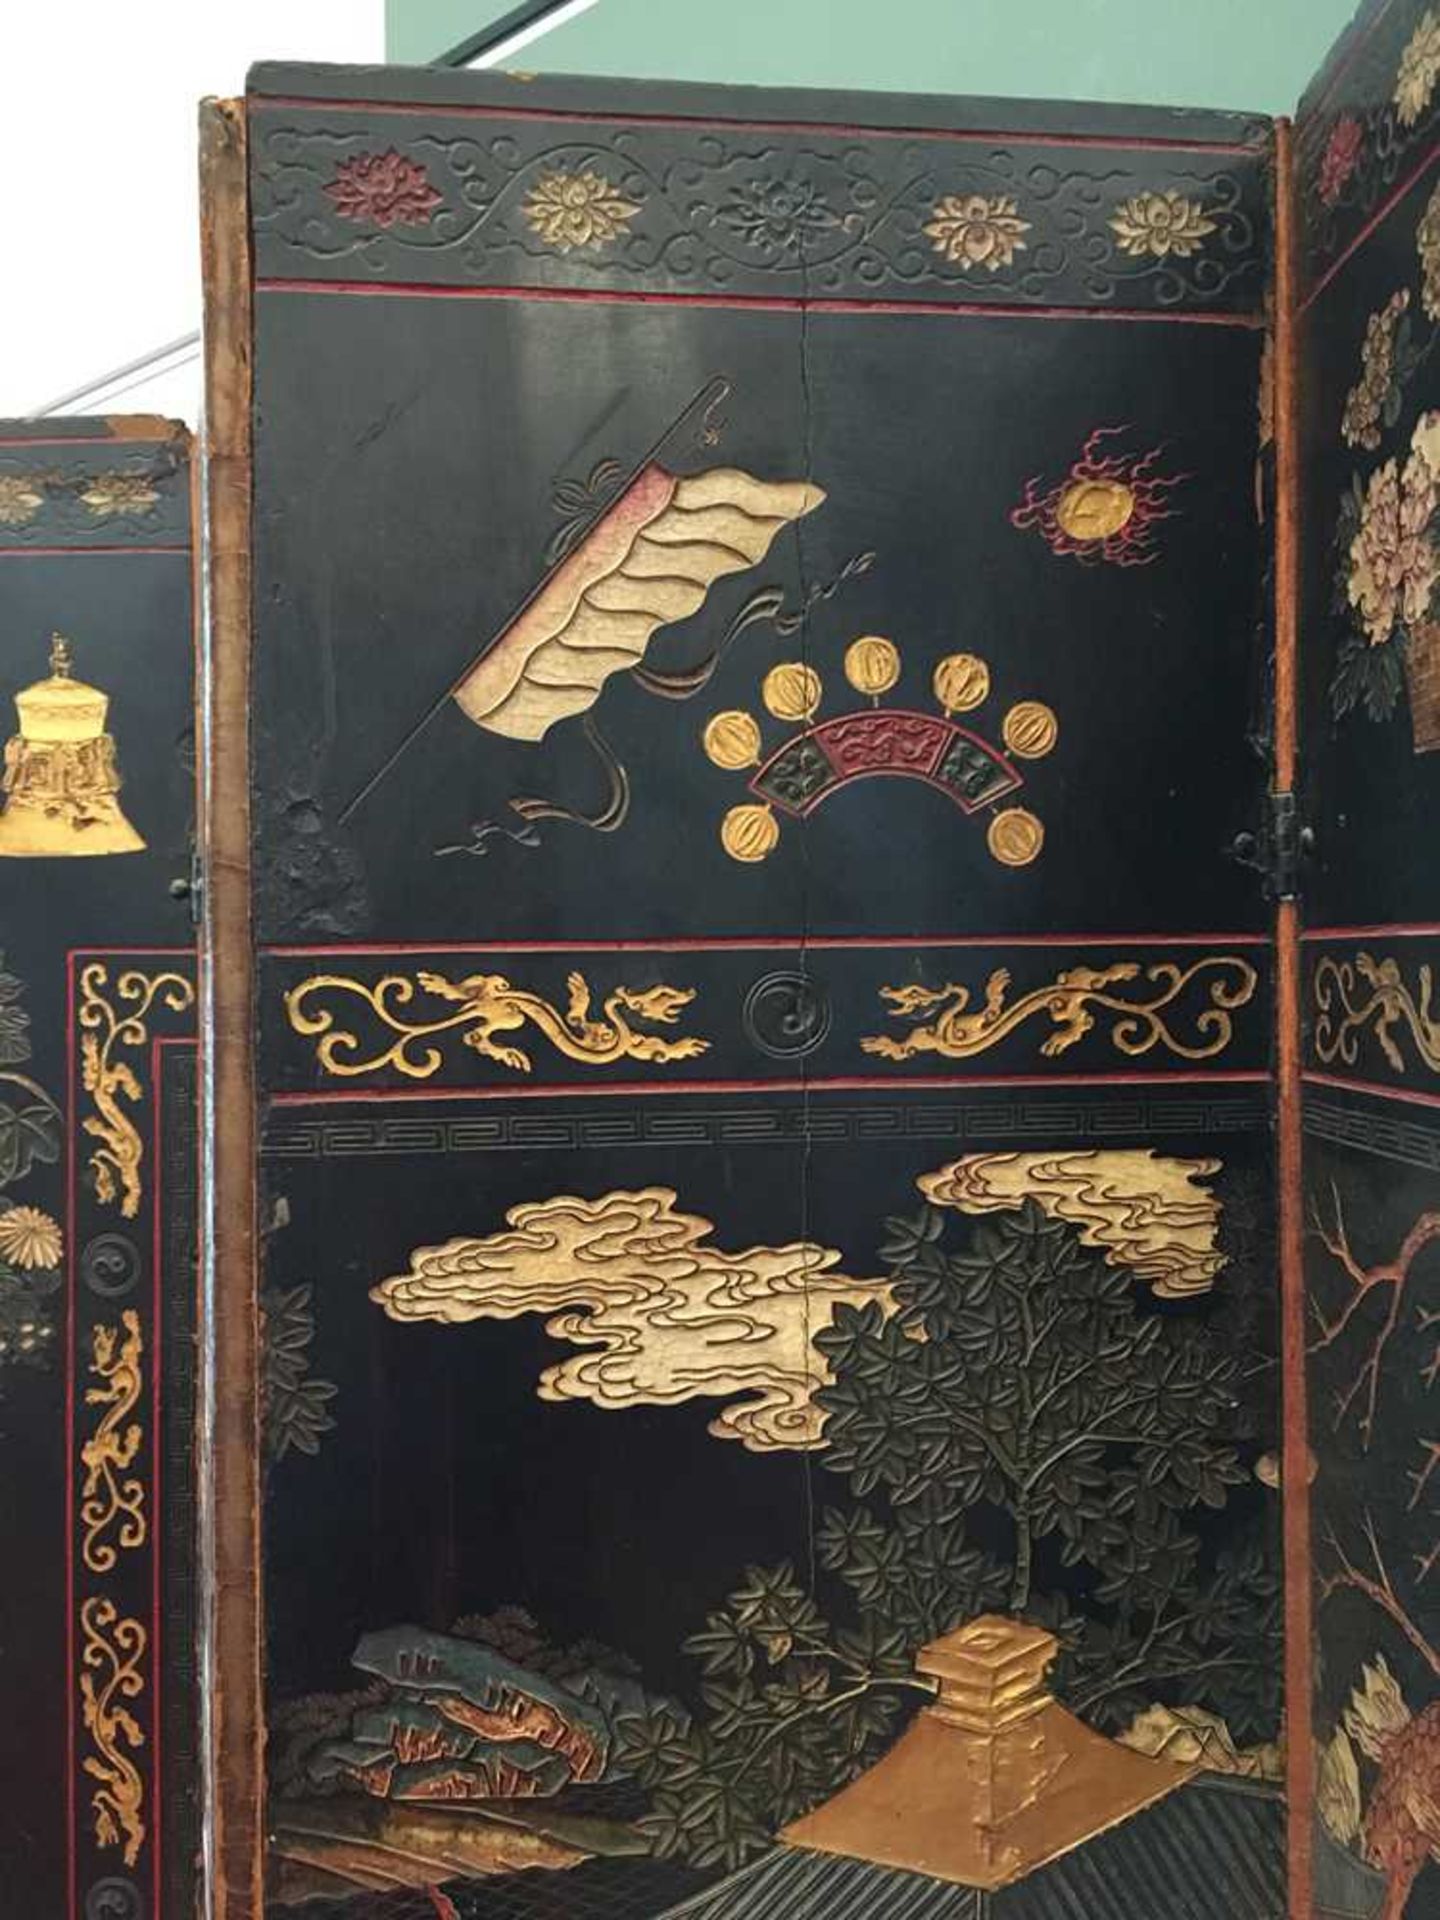 A CHINESE COROMANDEL BLACK LACQUER TWELVE-PANEL SCREEN QING DYNASTY, 18TH CENTURY - Image 13 of 72